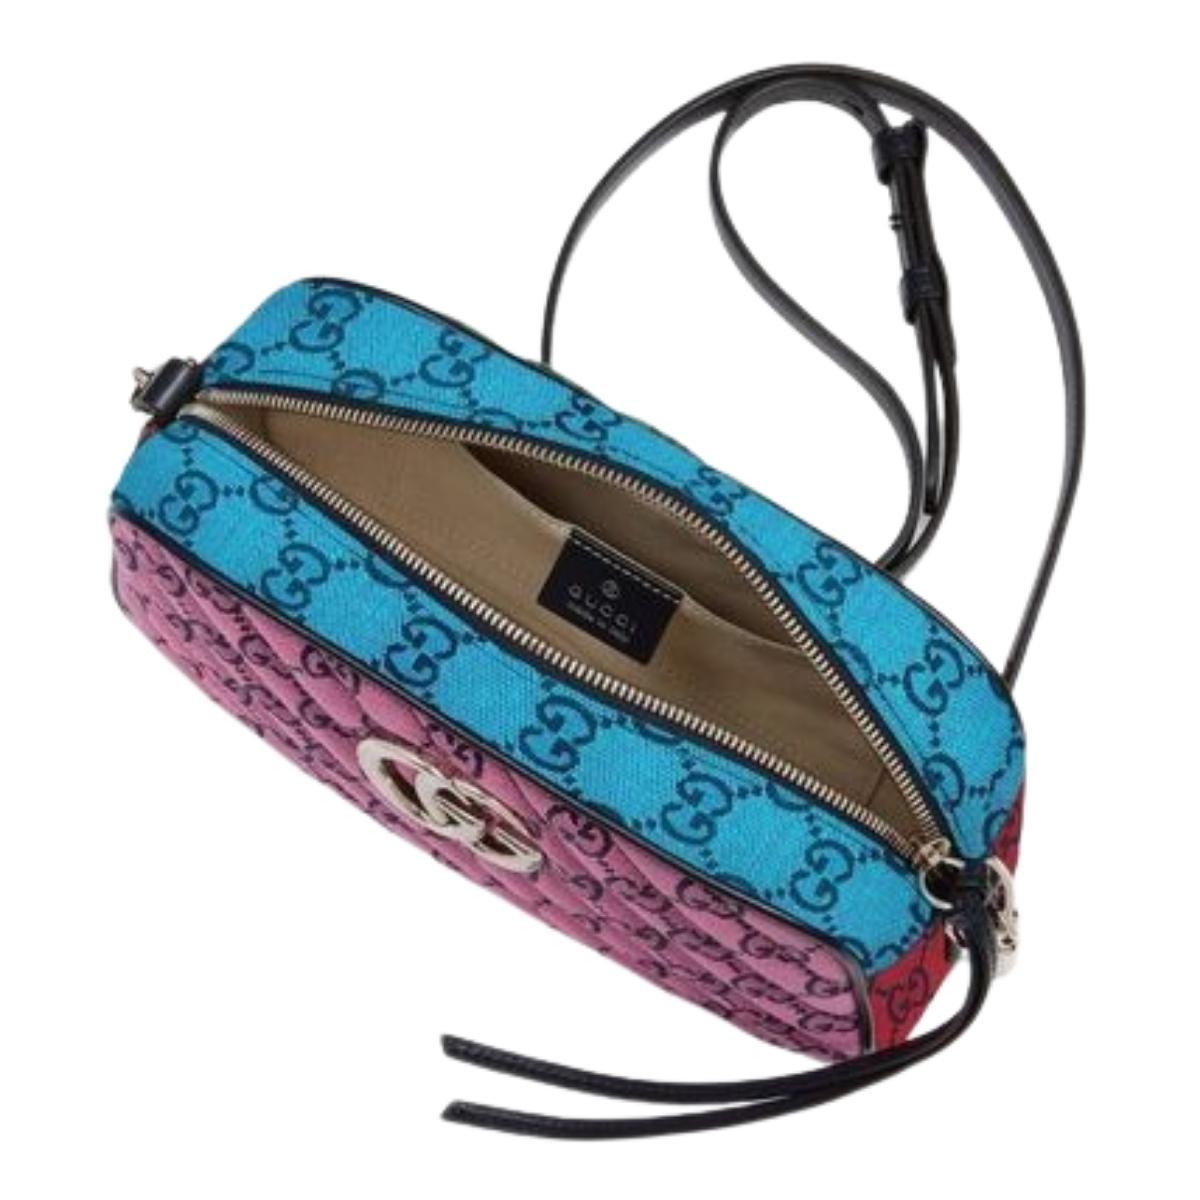 Follow us on insta @runwaycatalog
This GG Marmont small shoulder bag has an adjustable strap and is part of the GG Multicolor collection. 
Pink, green, red and blue diagonal matelassé GG canvas. 
Blue leather trim. 
Silver-toned hardware. 
Double G.